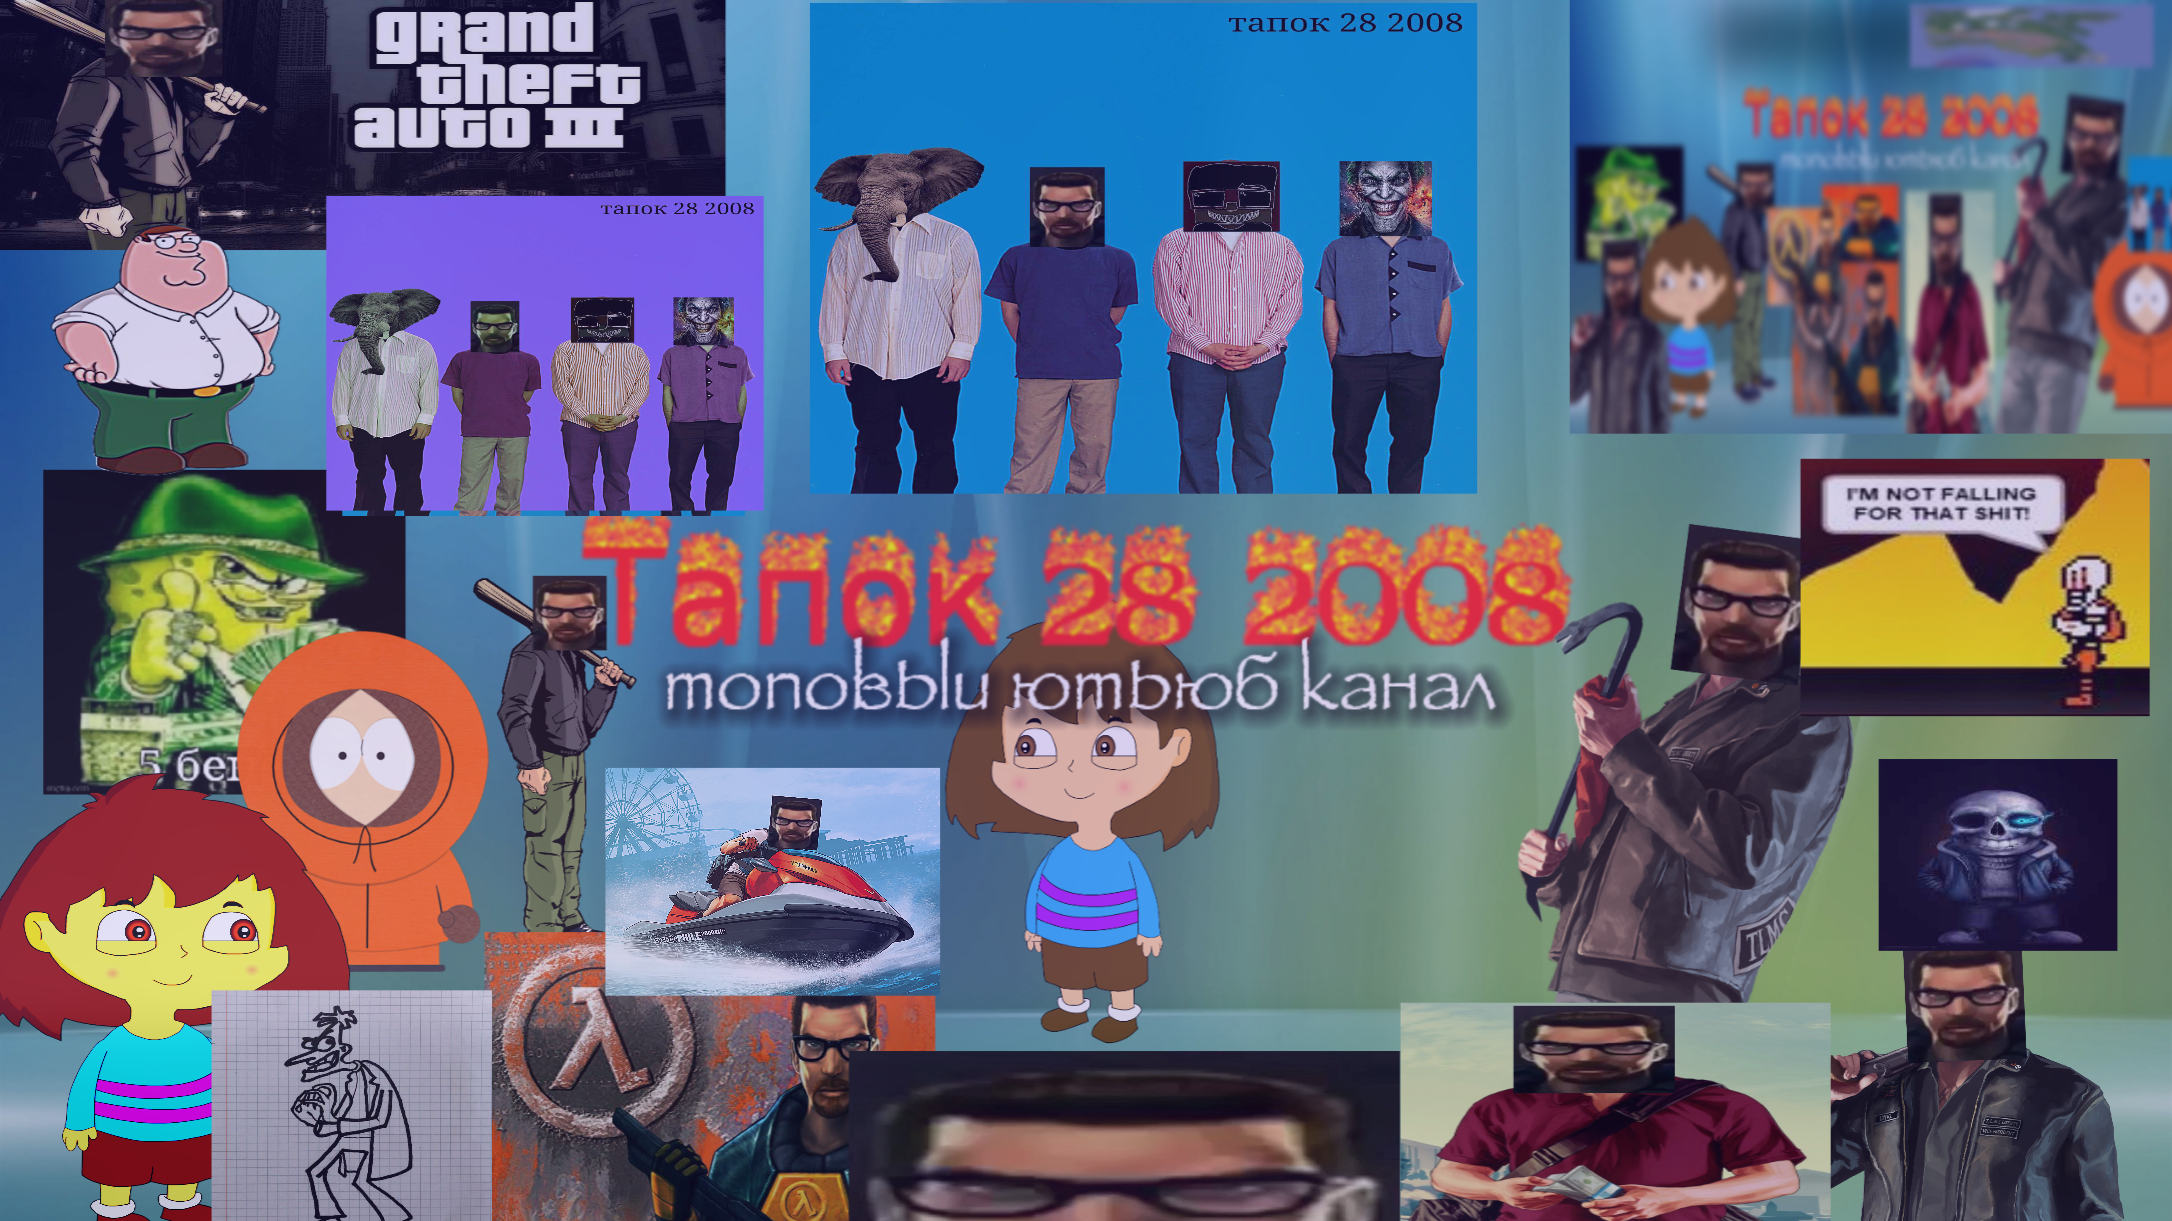 tapok_banner.png